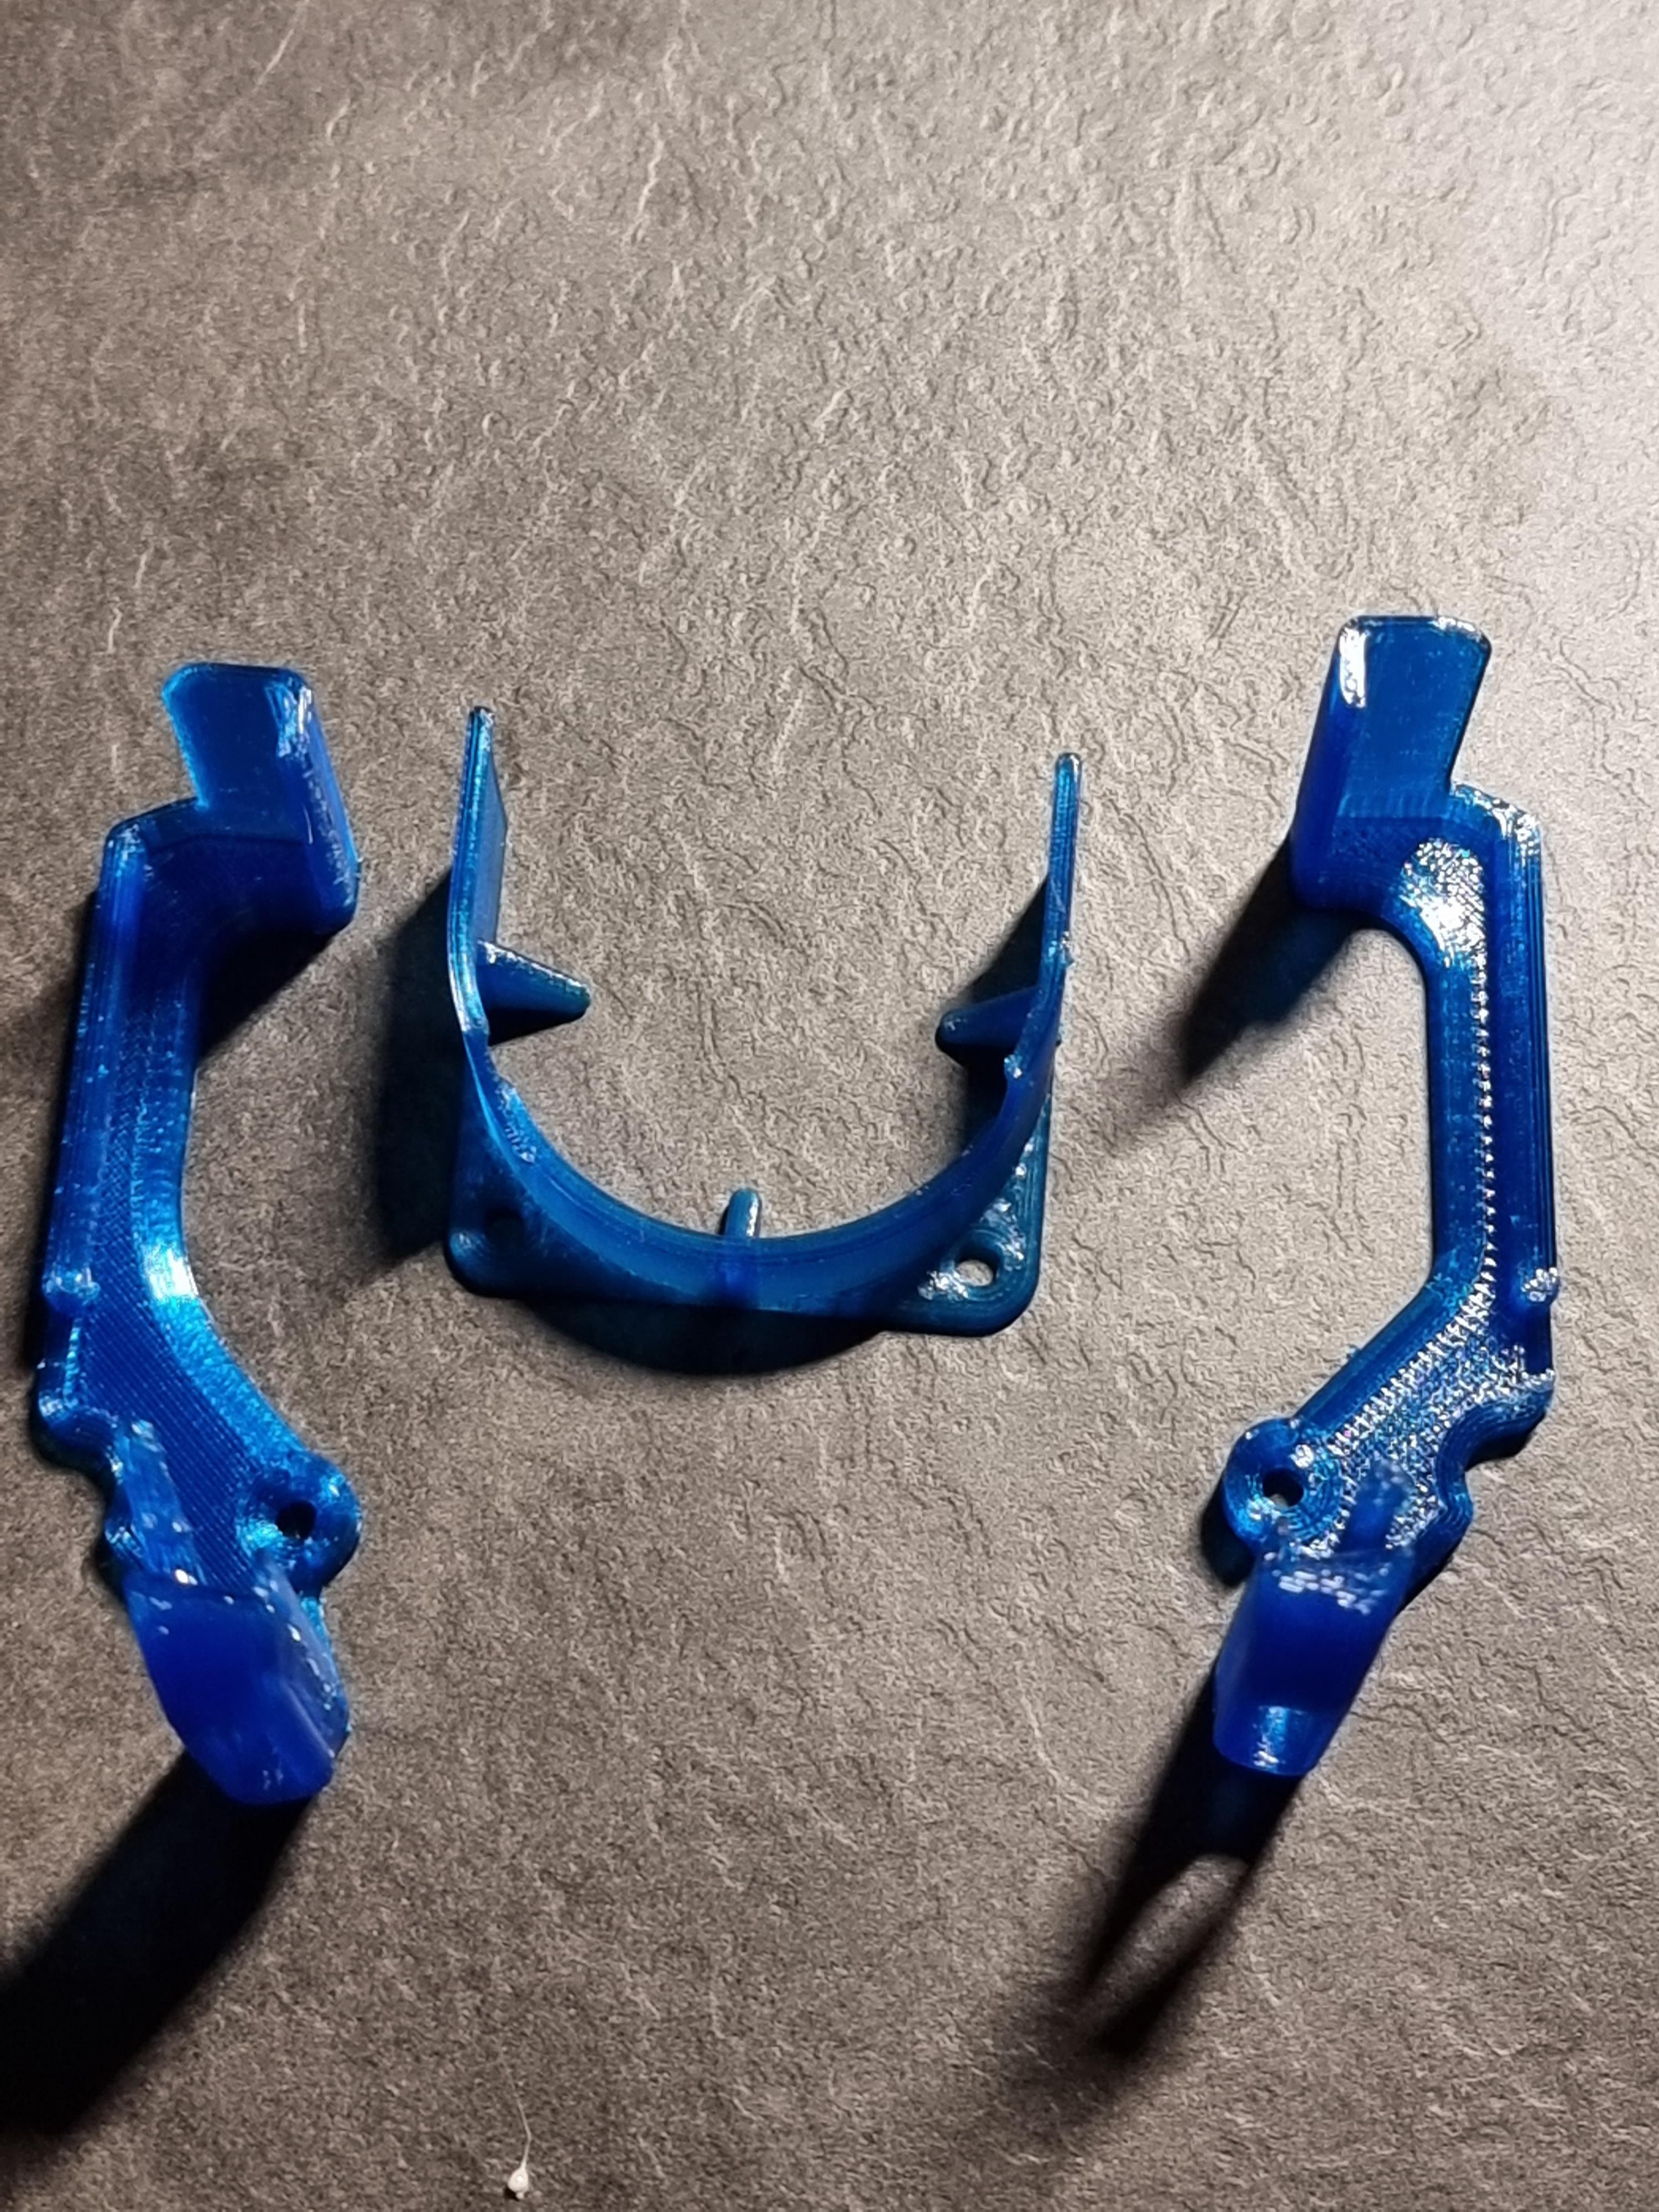 Anycubic Vyper & Kobra Max Part Cooling Duct UPGRADE!  - Printed using PETG on Artillery Genius, Easy to install. - 3d model